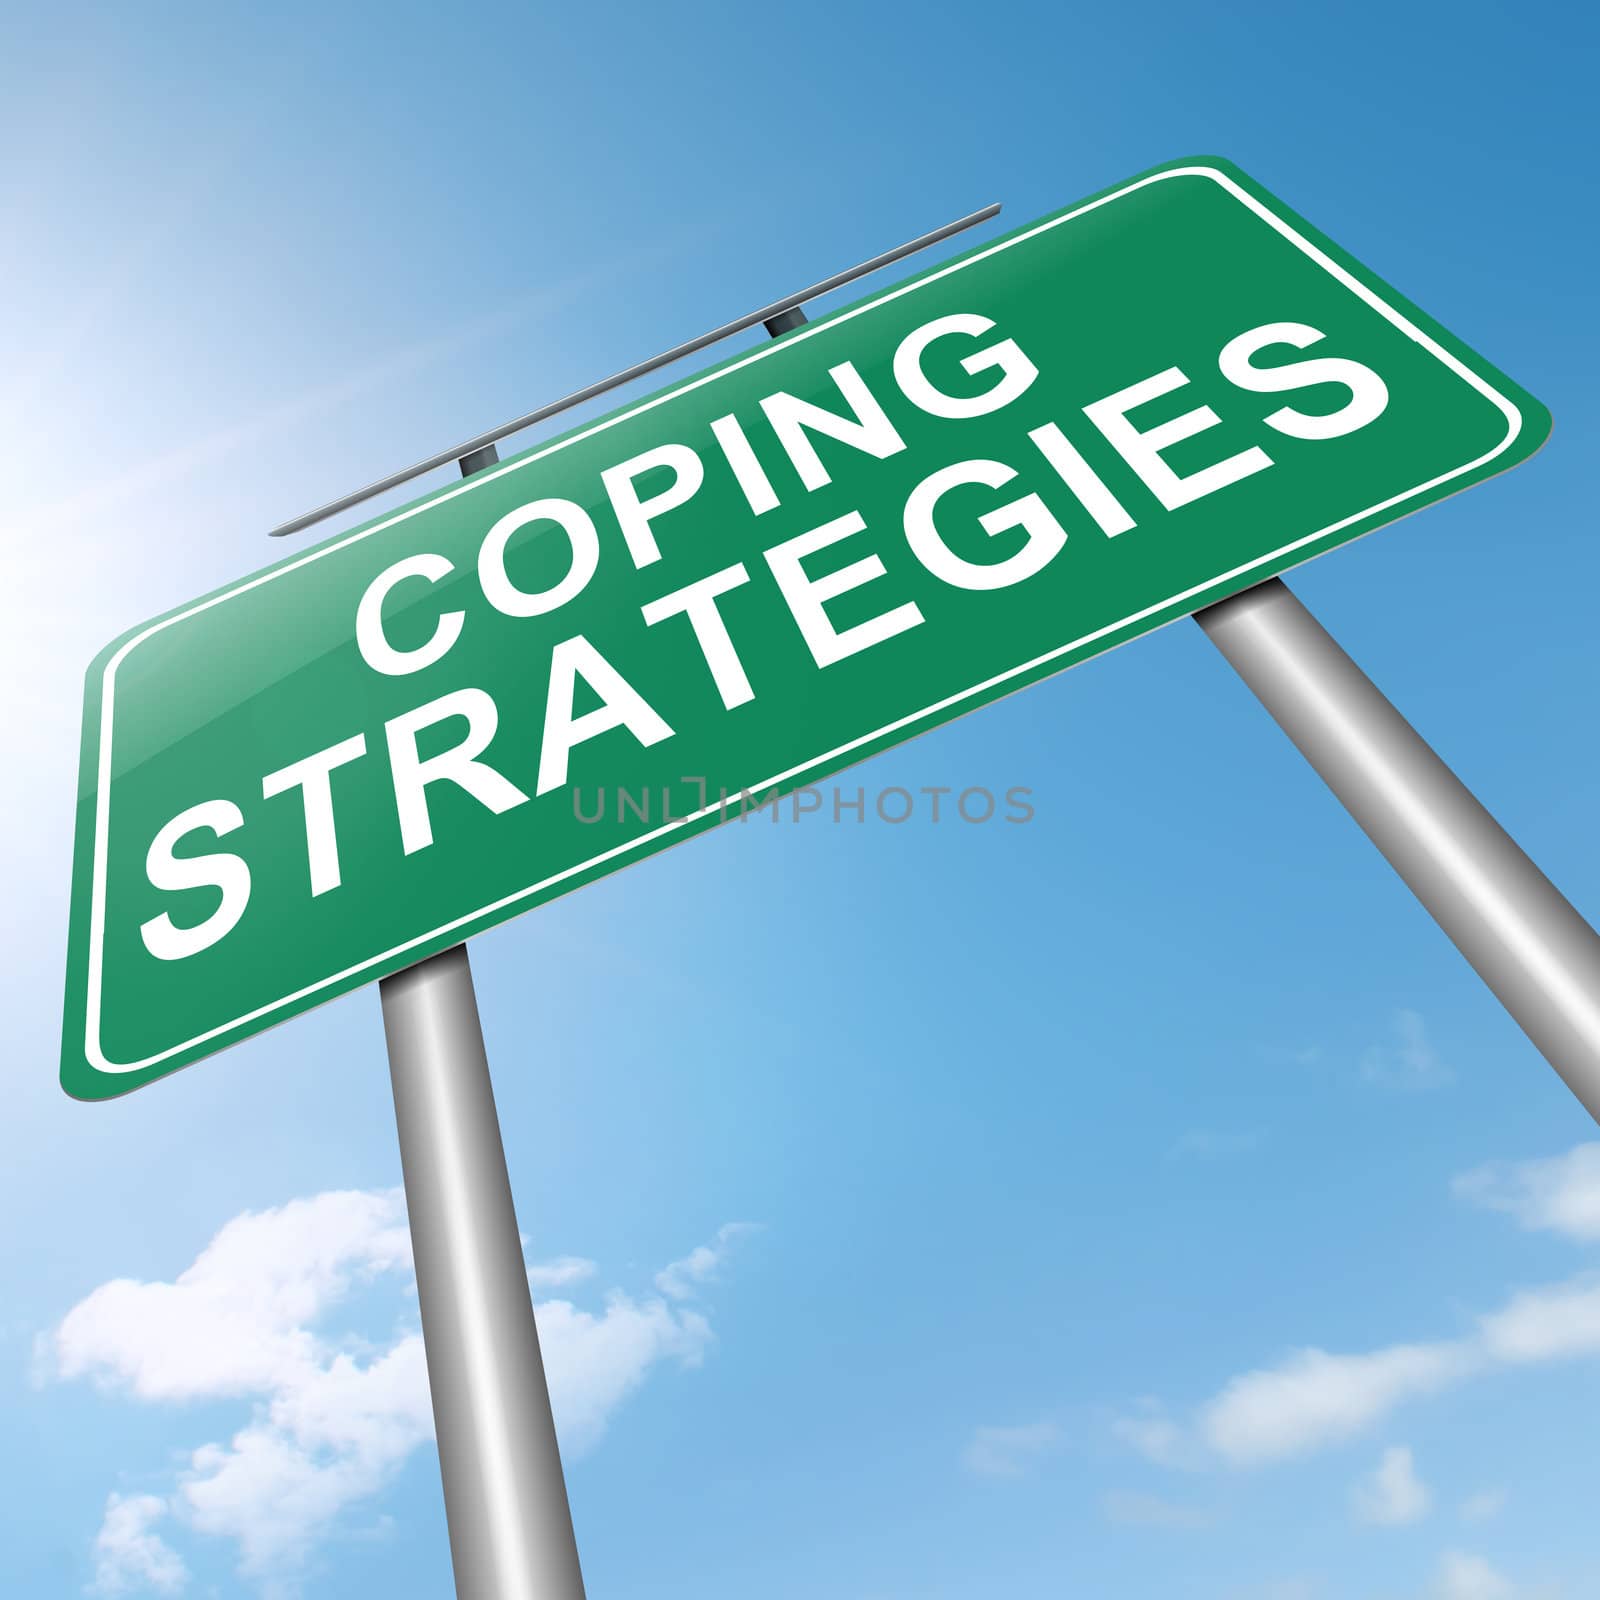 Coping strategies. by 72soul